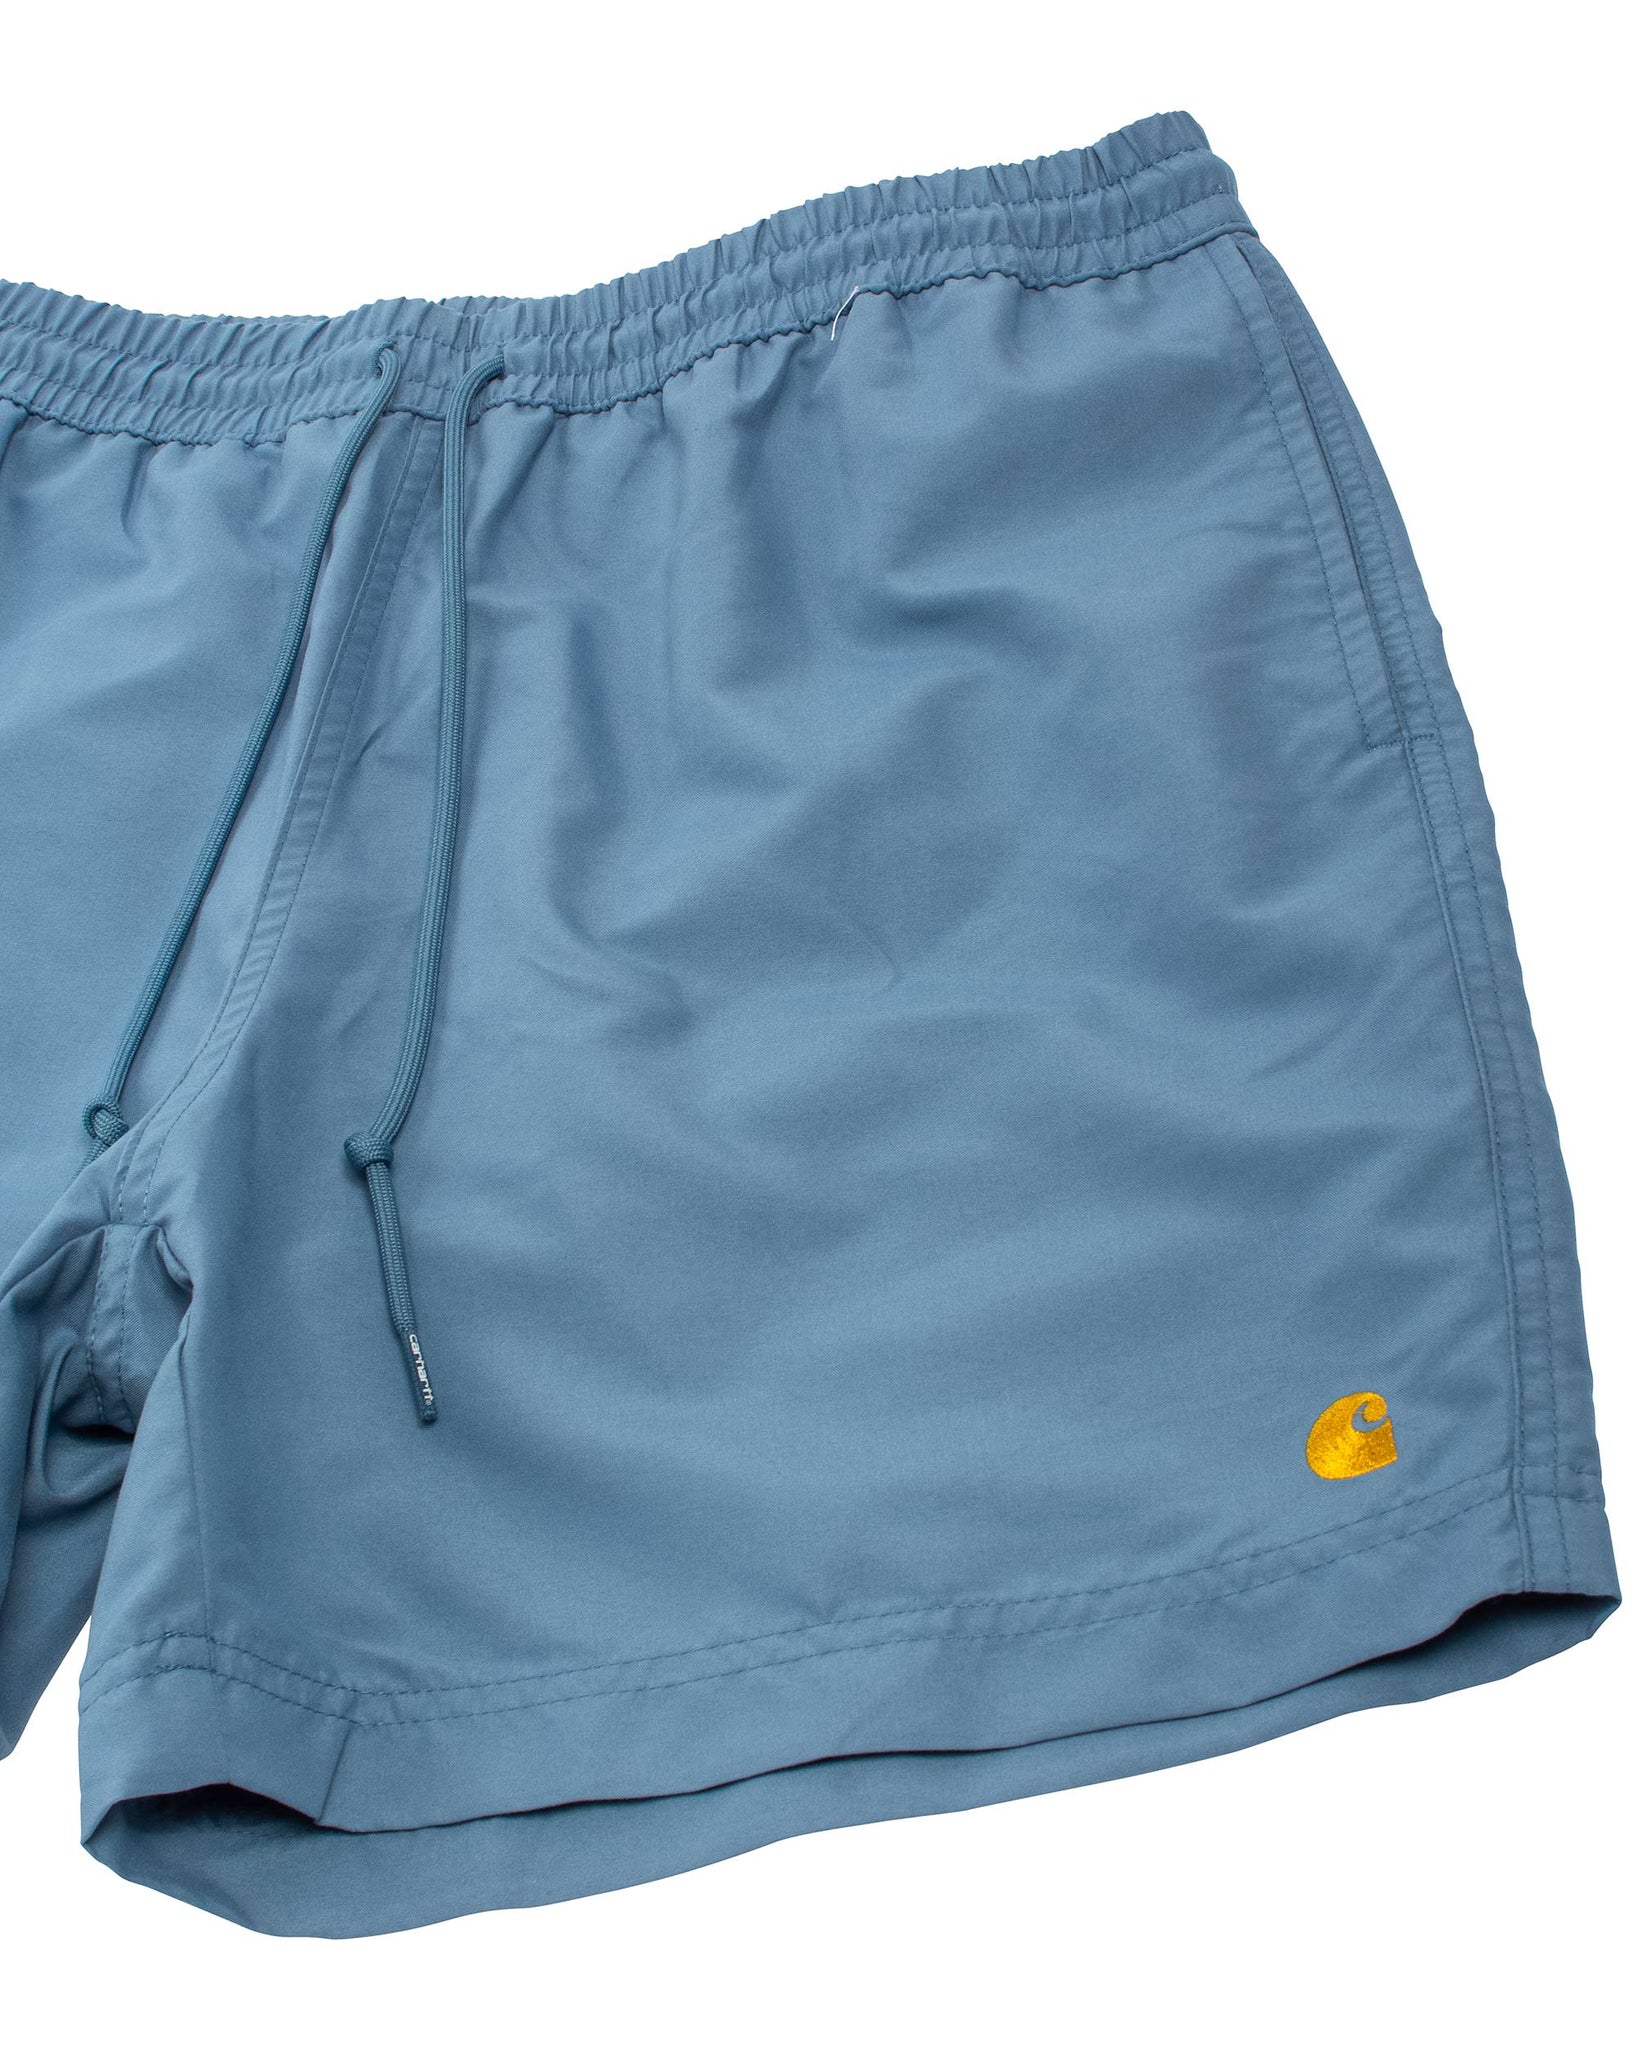 Carhartt W.I.P. Chase Swim Trunk Icy Water Details